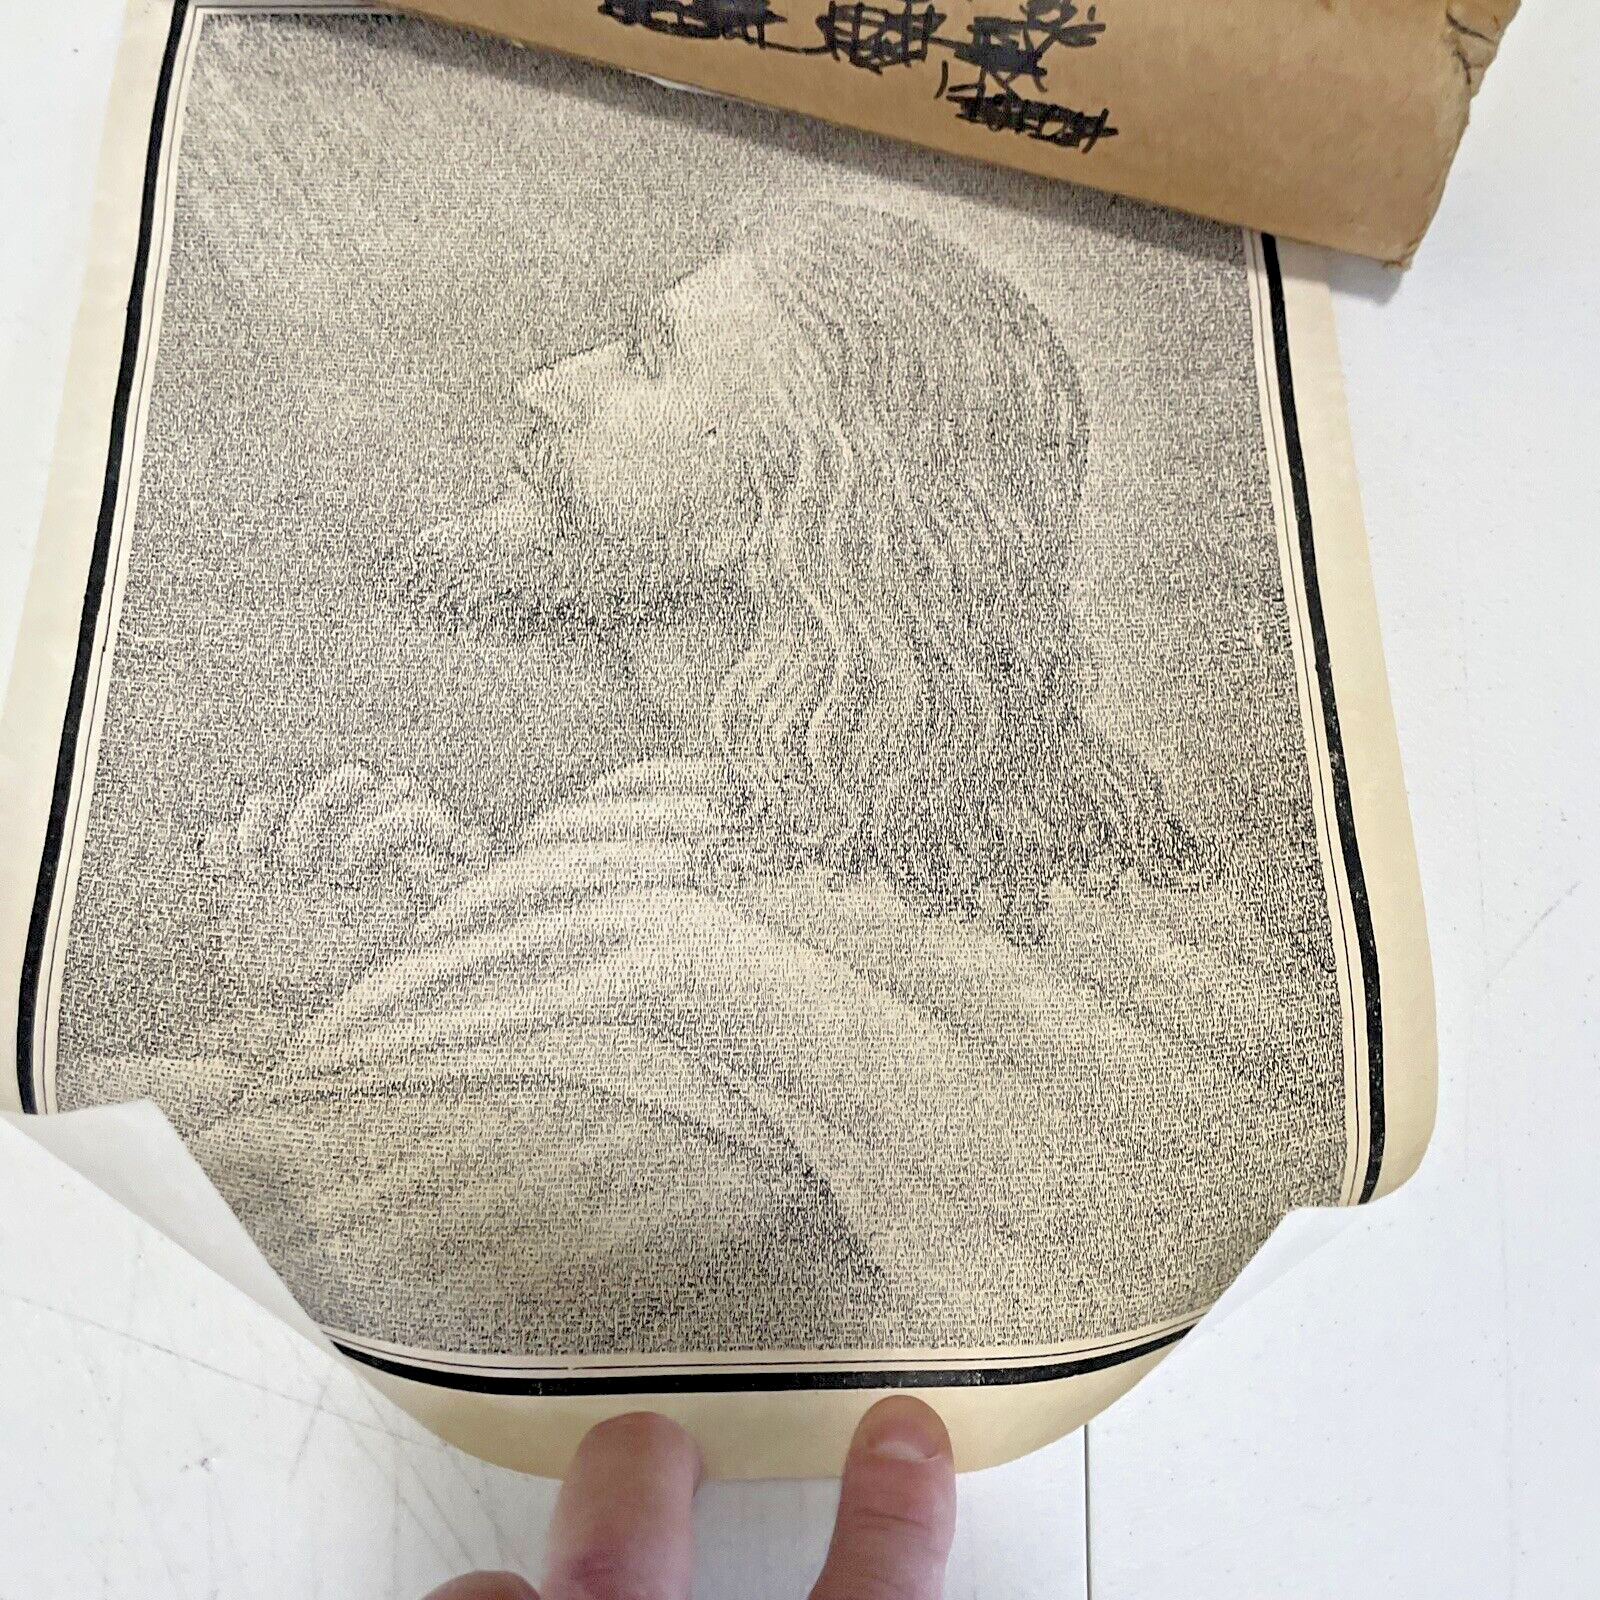 Vintage Jesus Print Made Of Tiny Bible Text REALLY GREAT